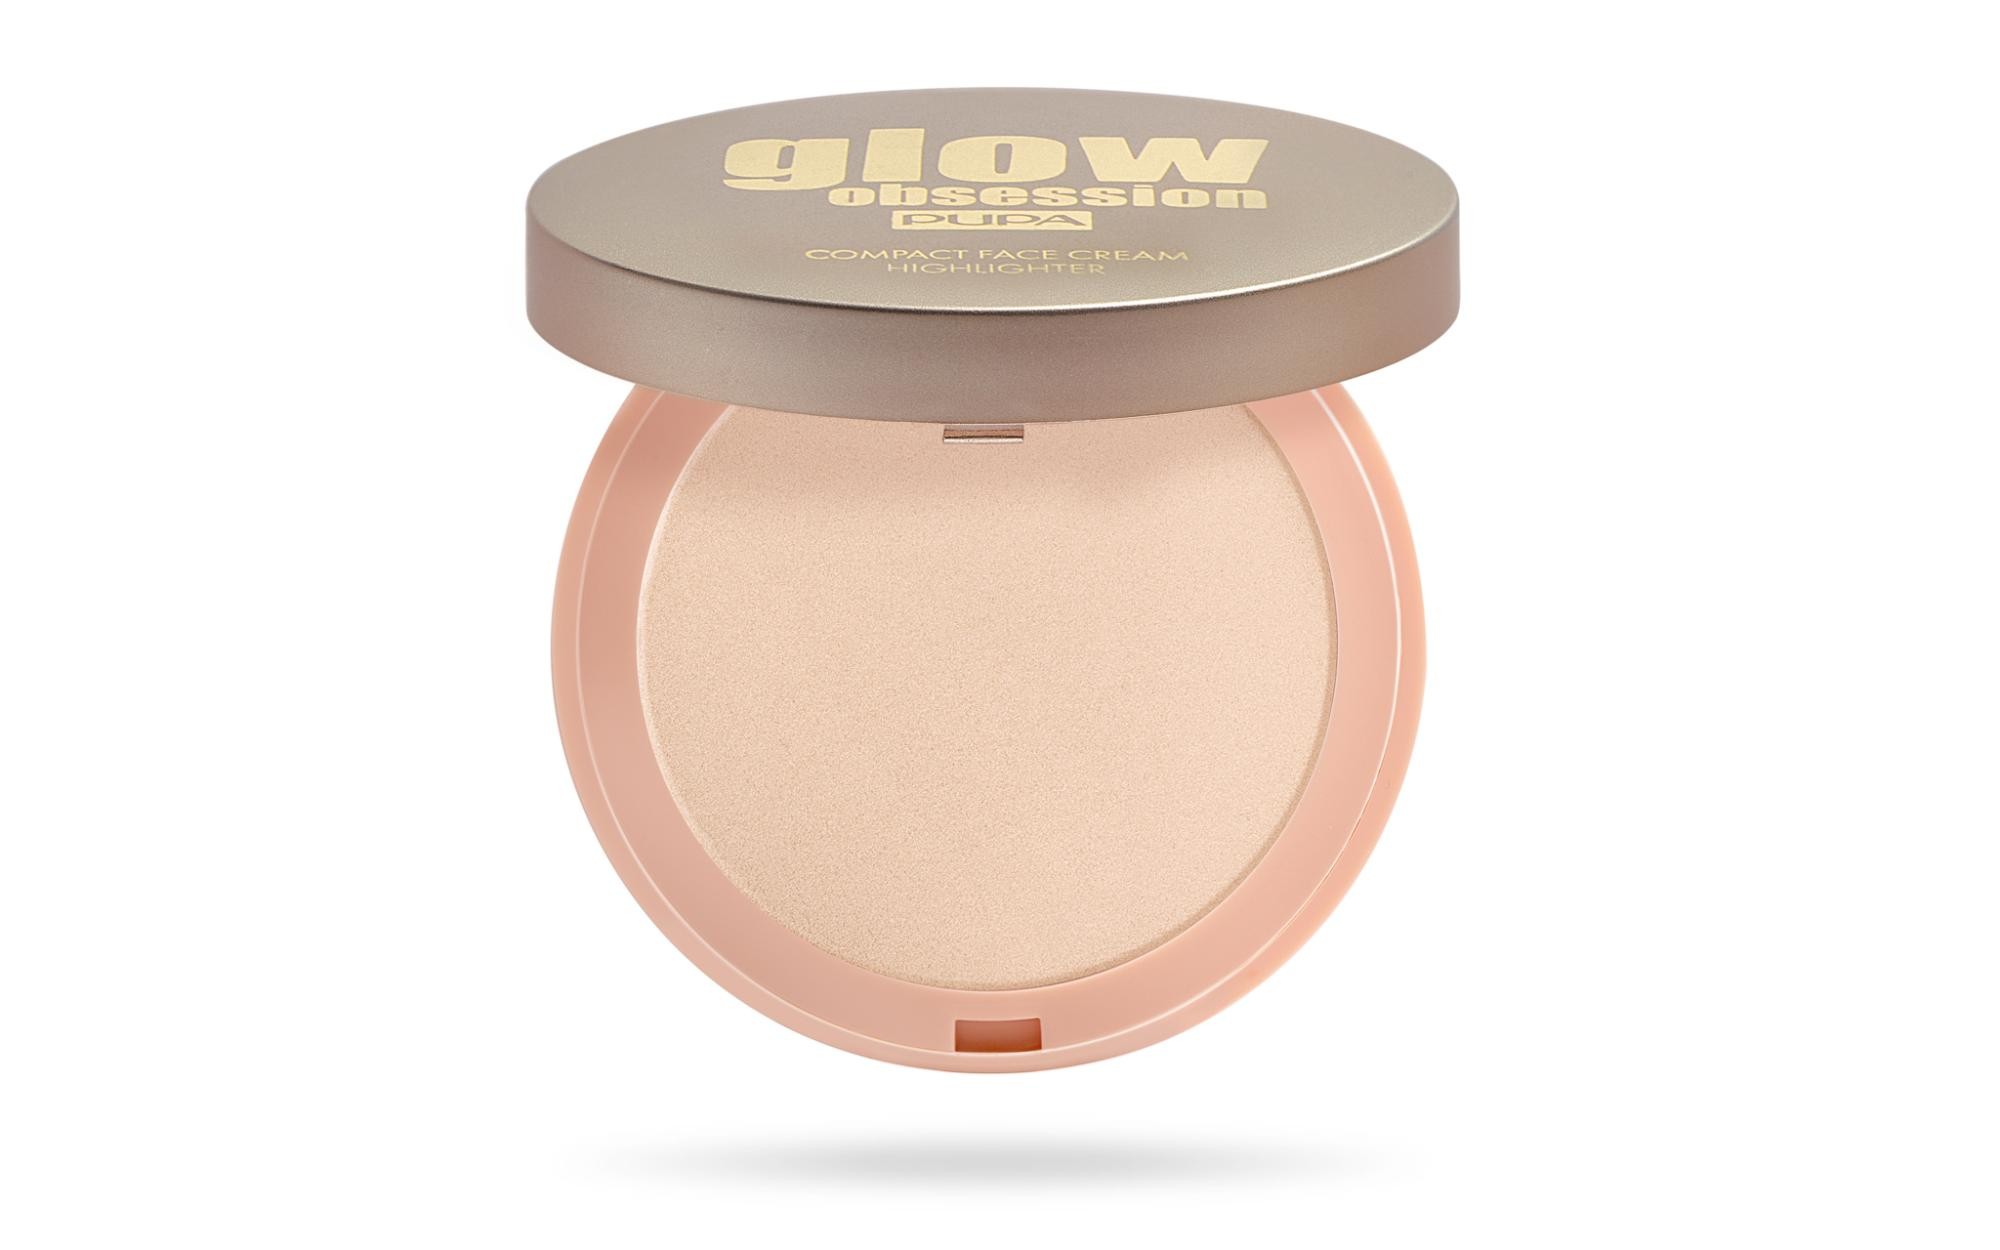 PUPA Milano Glow Obsession Compact Face Cream Highlighter 001 Aura 9g